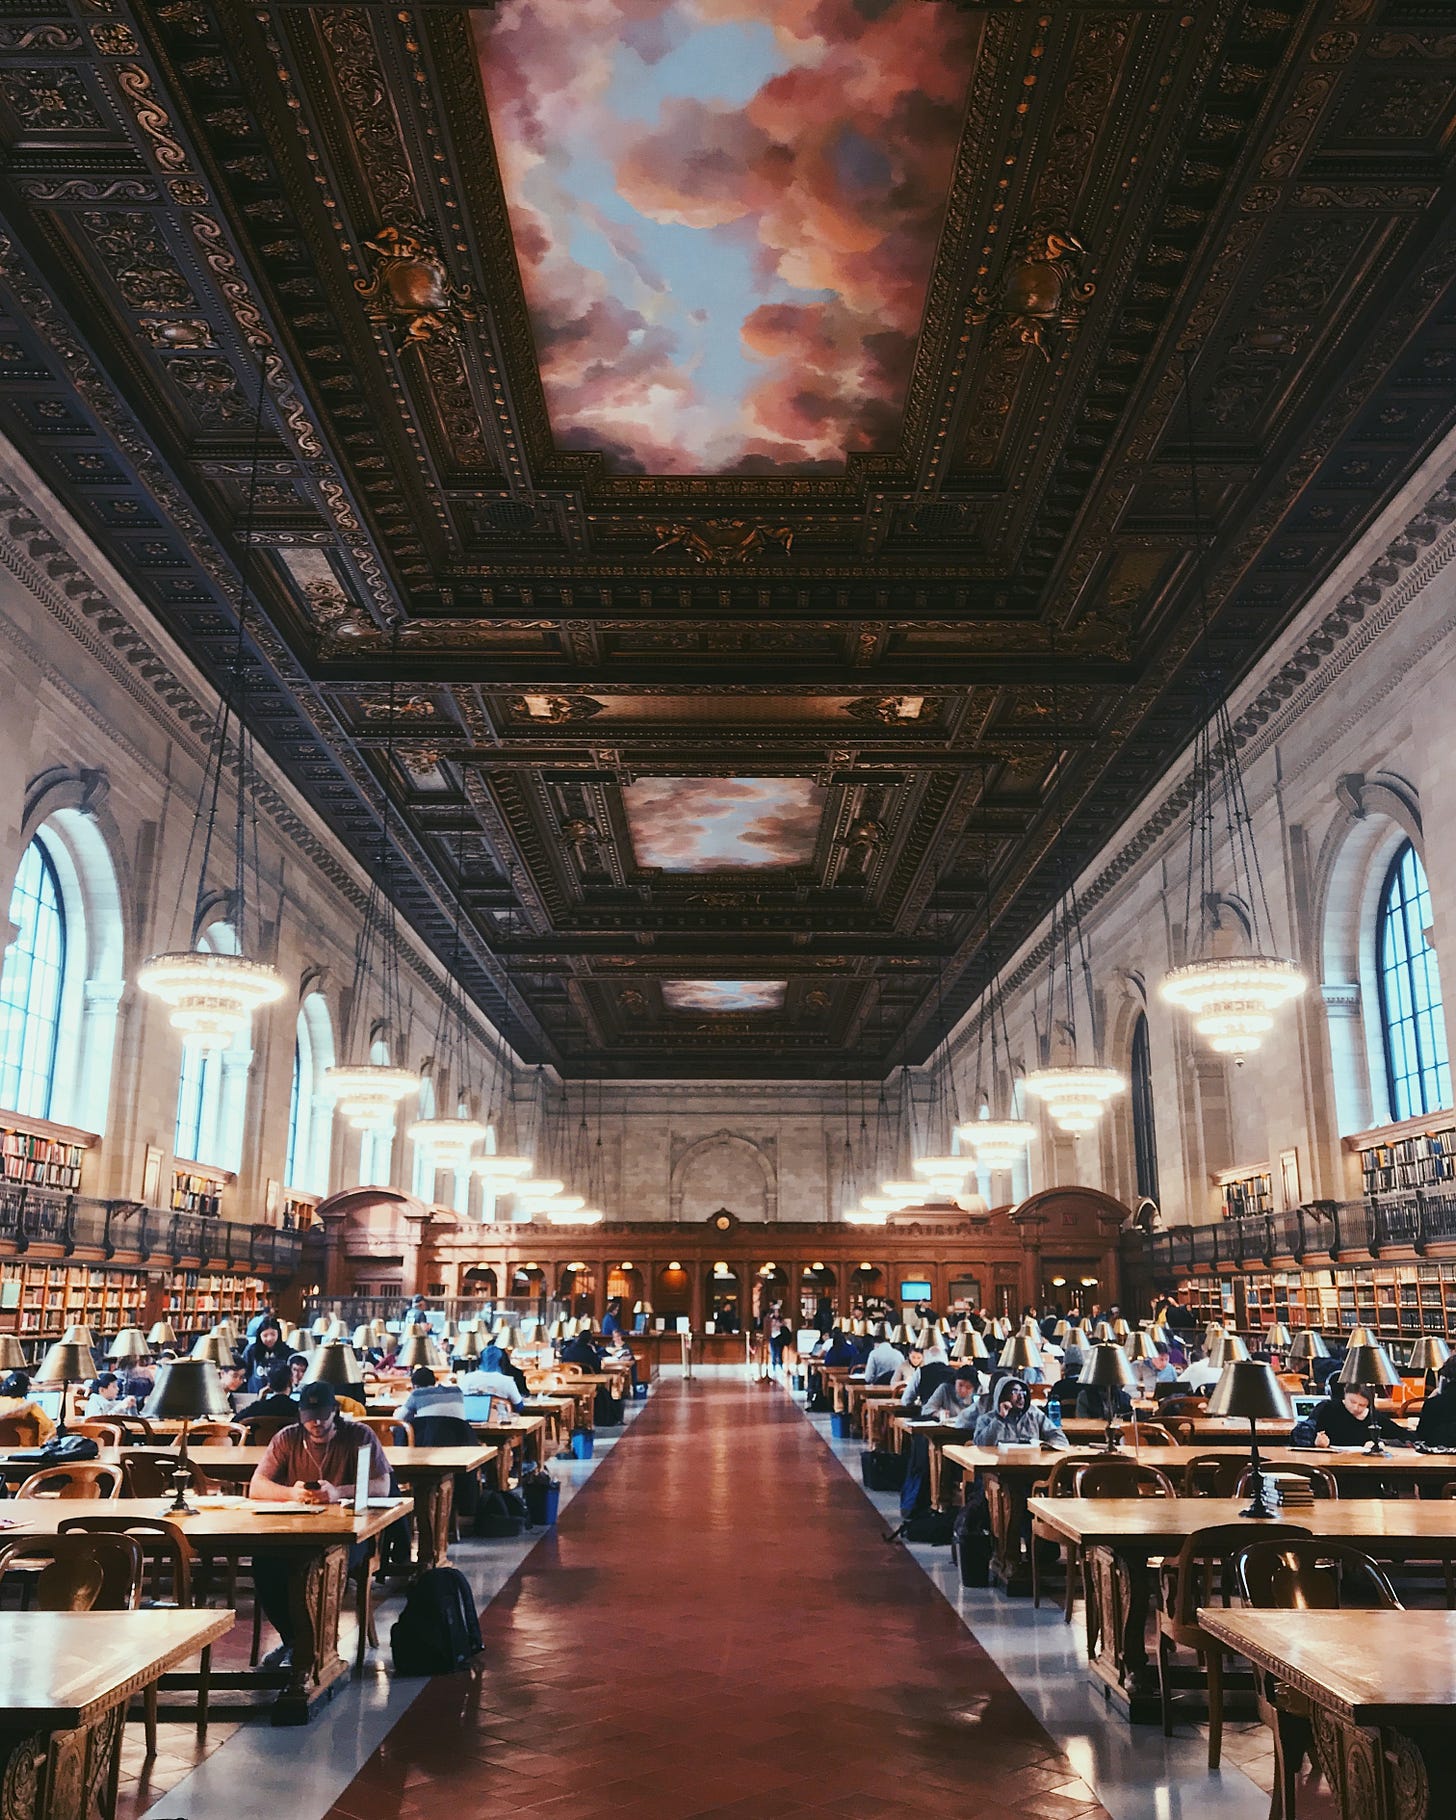 The beautiful study room in the New York public library.